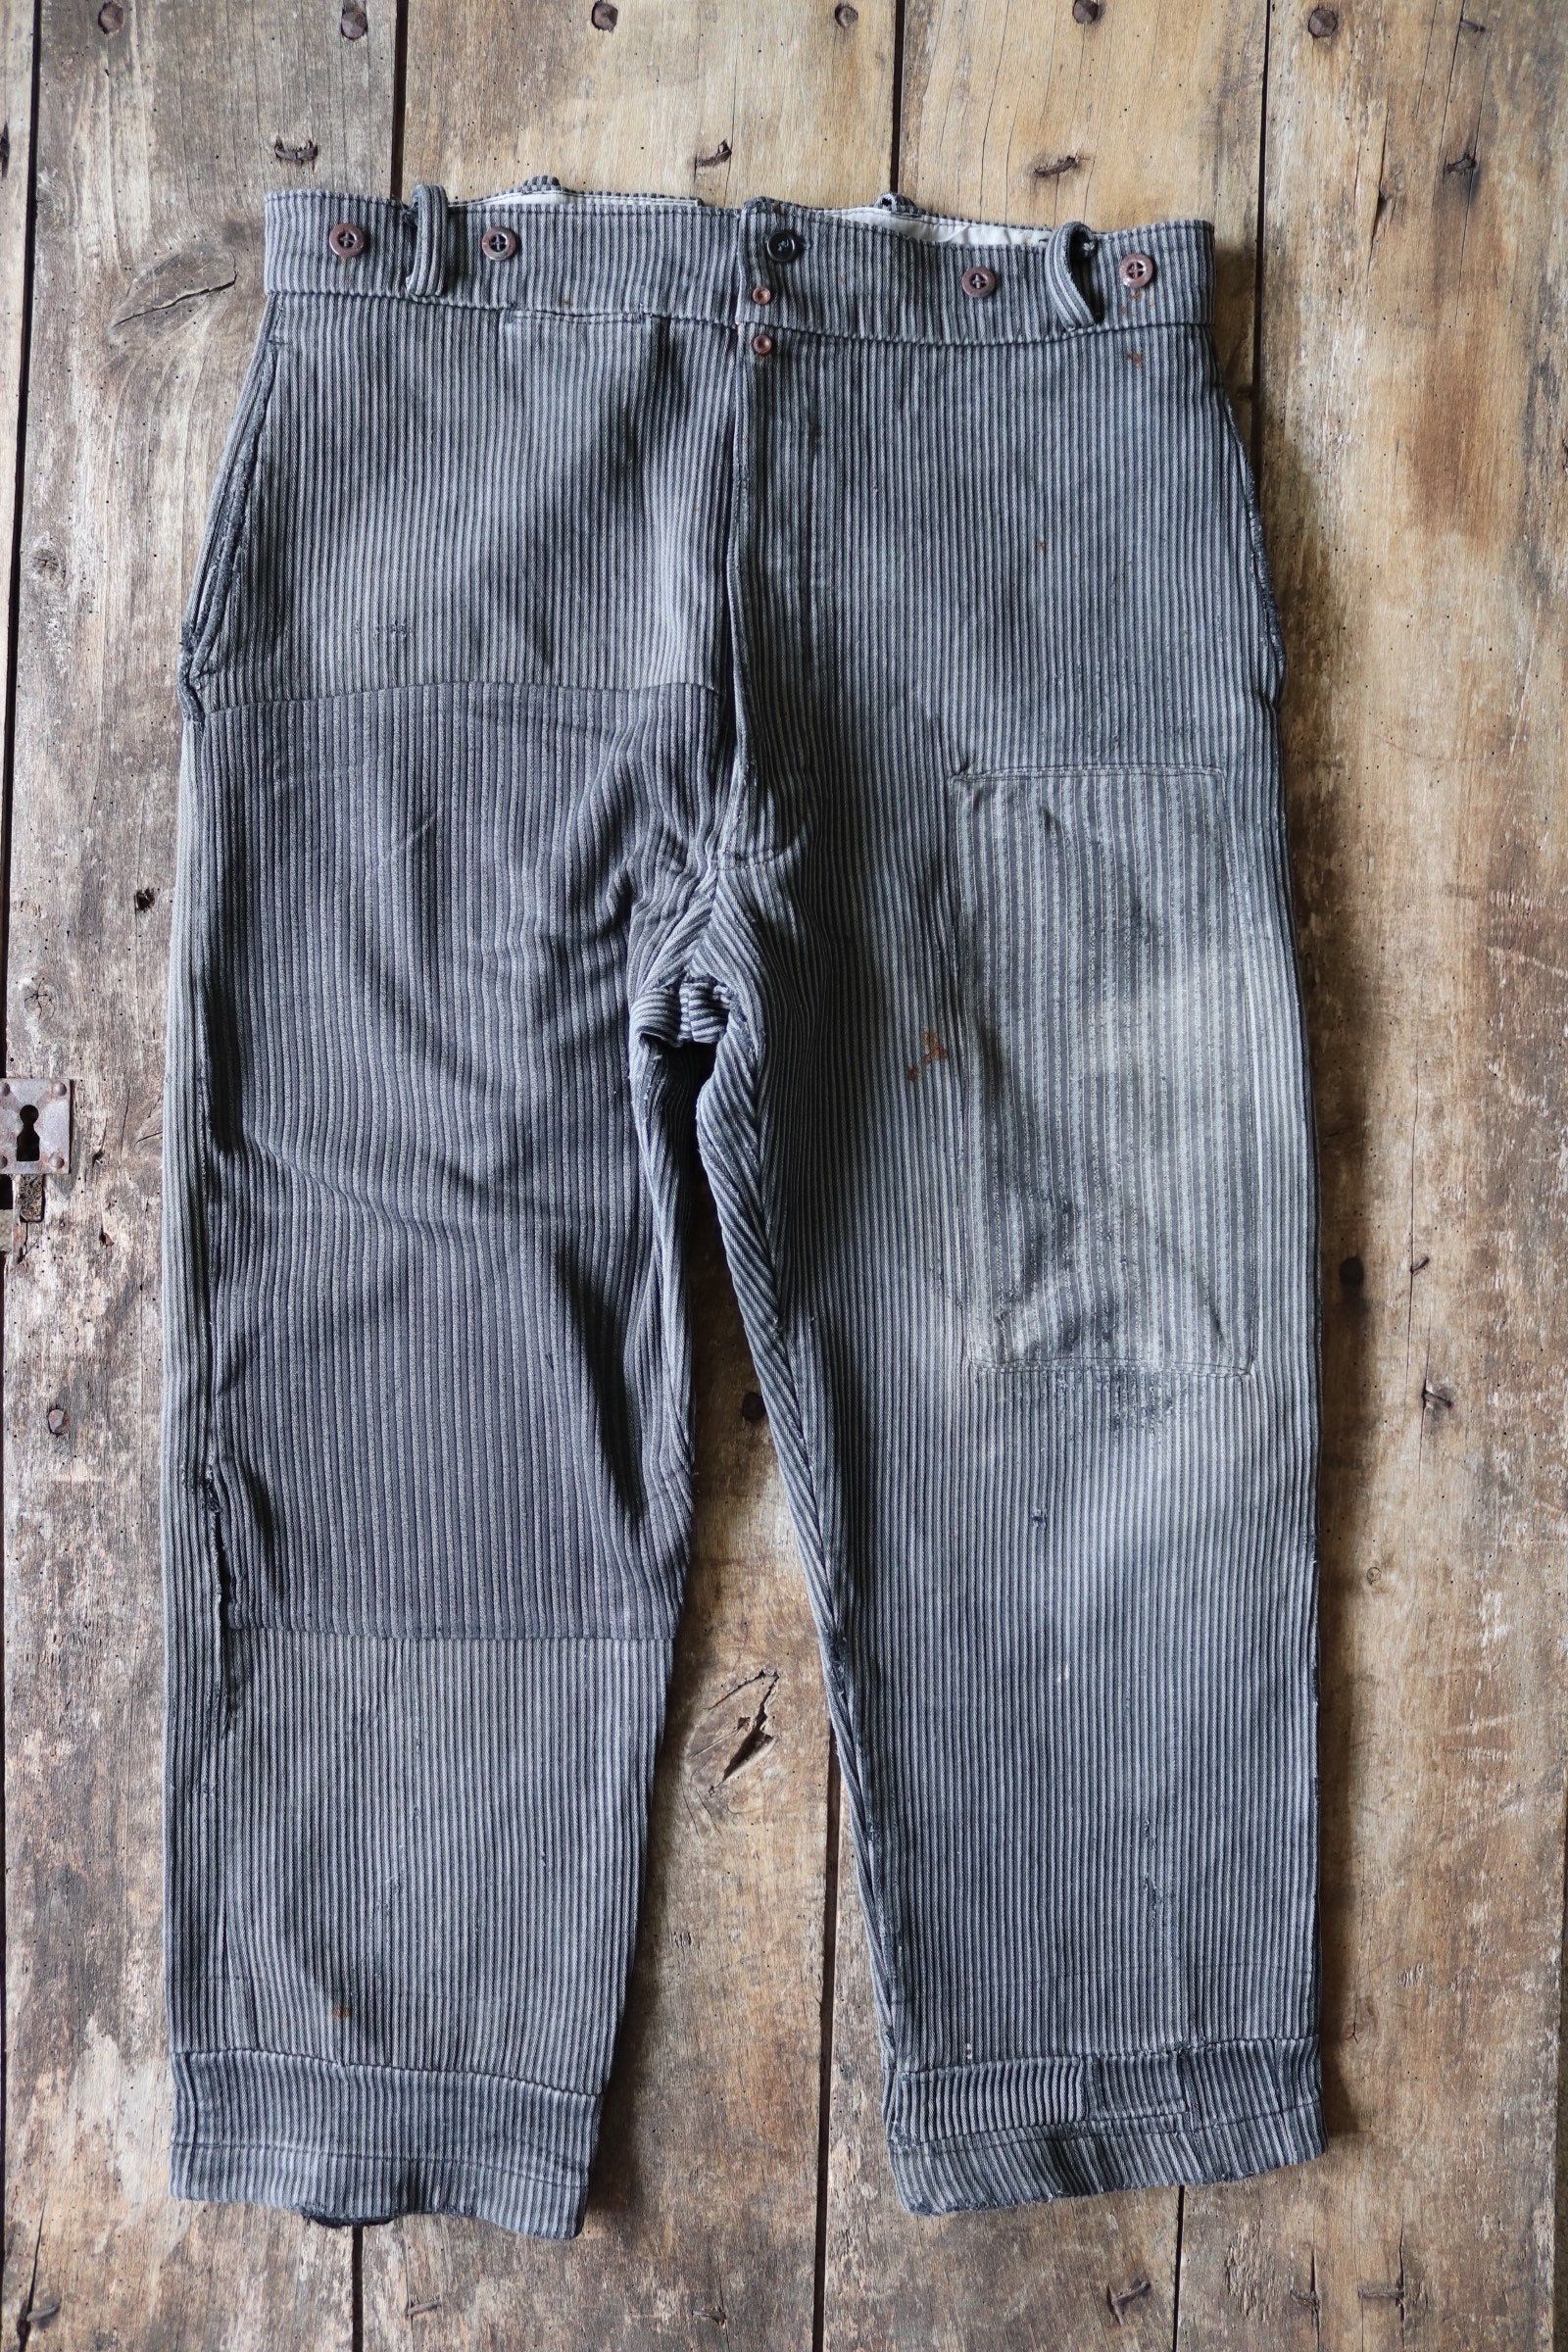 Grey Pants With Navy Pinstripes - Rover Plus Nine